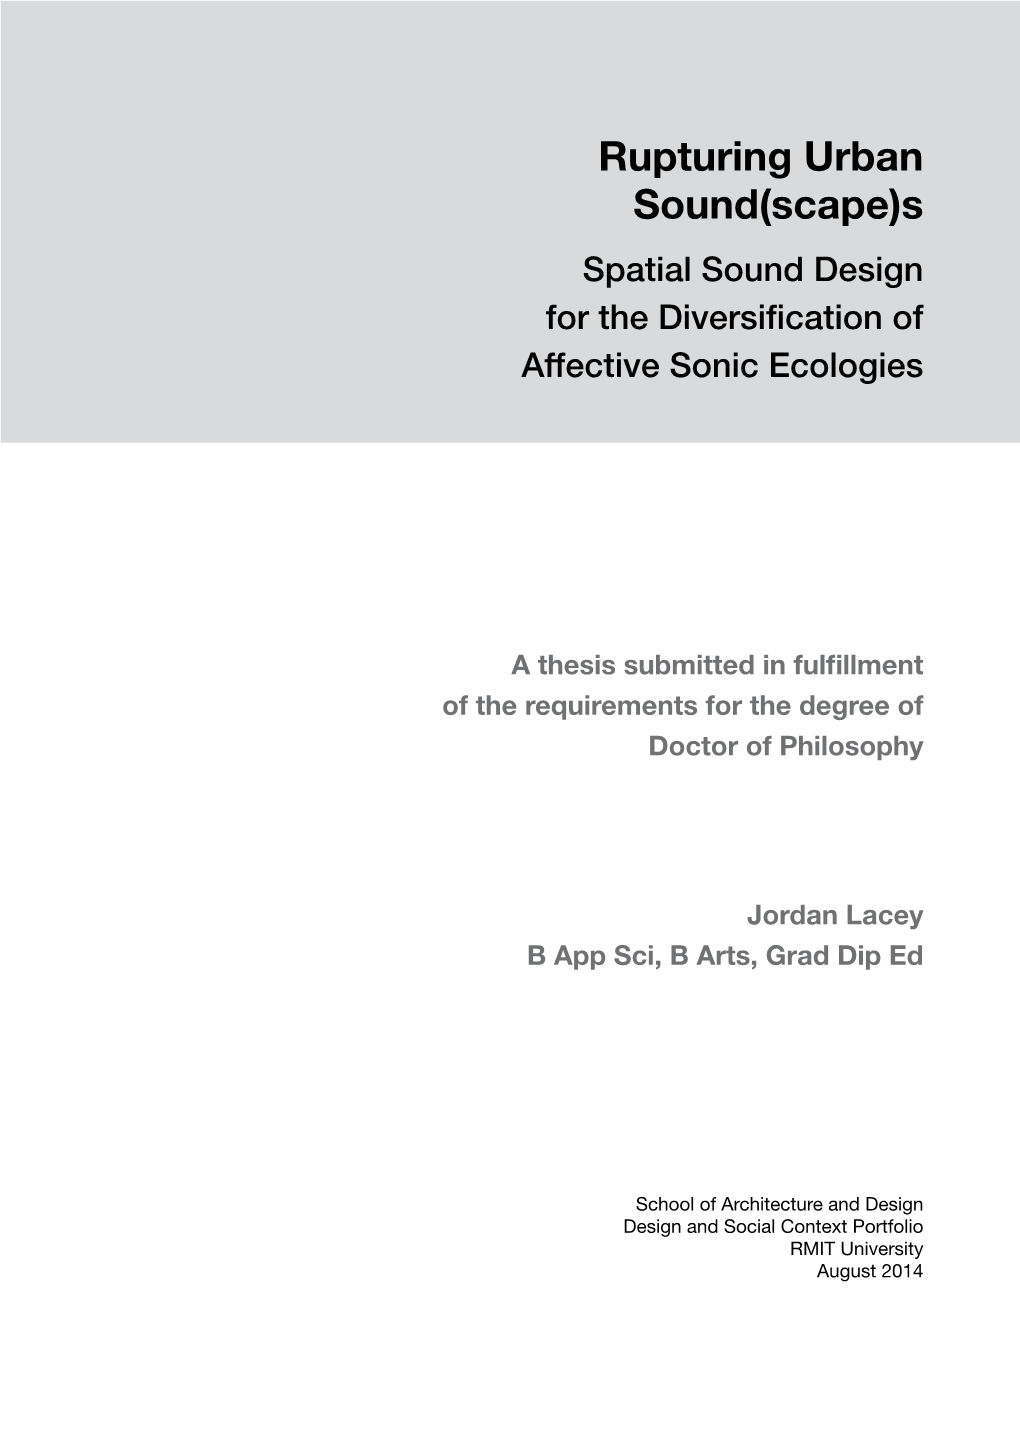 Rupturing Urban Sound(Scape)S Spatial Sound Design for the Diversification of Affective Sonic Ecologies